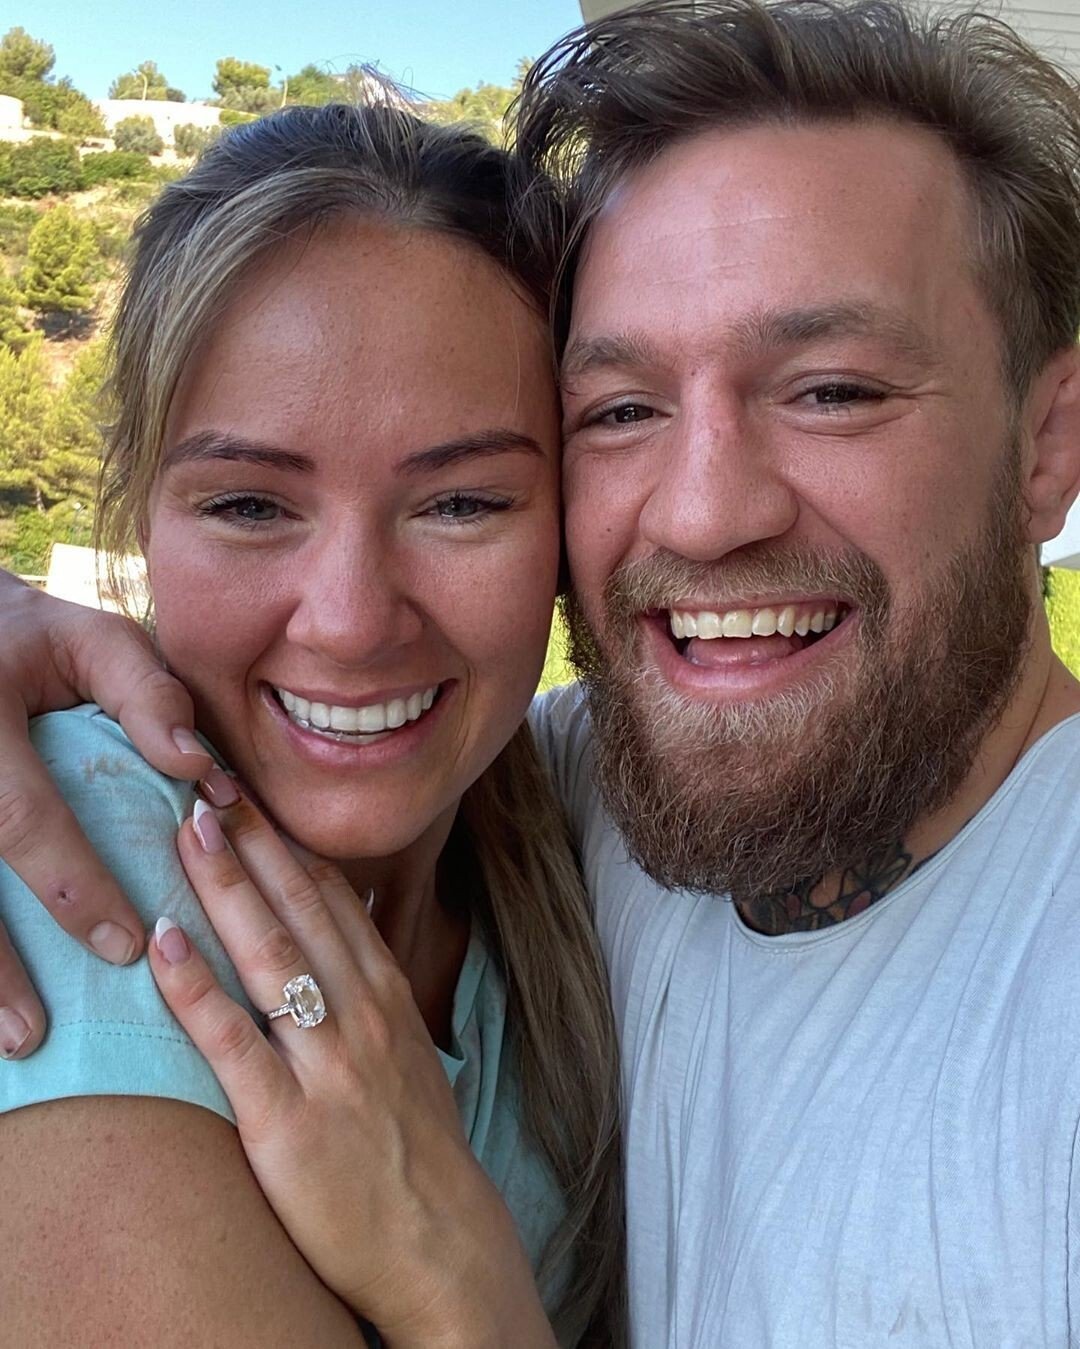 What next for Dee Devlin and now-fiancé Conor McGregor, after he announced his retirement from the ring and then engagement with long-term partner? Photo: @thenotoriousmma/Instagram